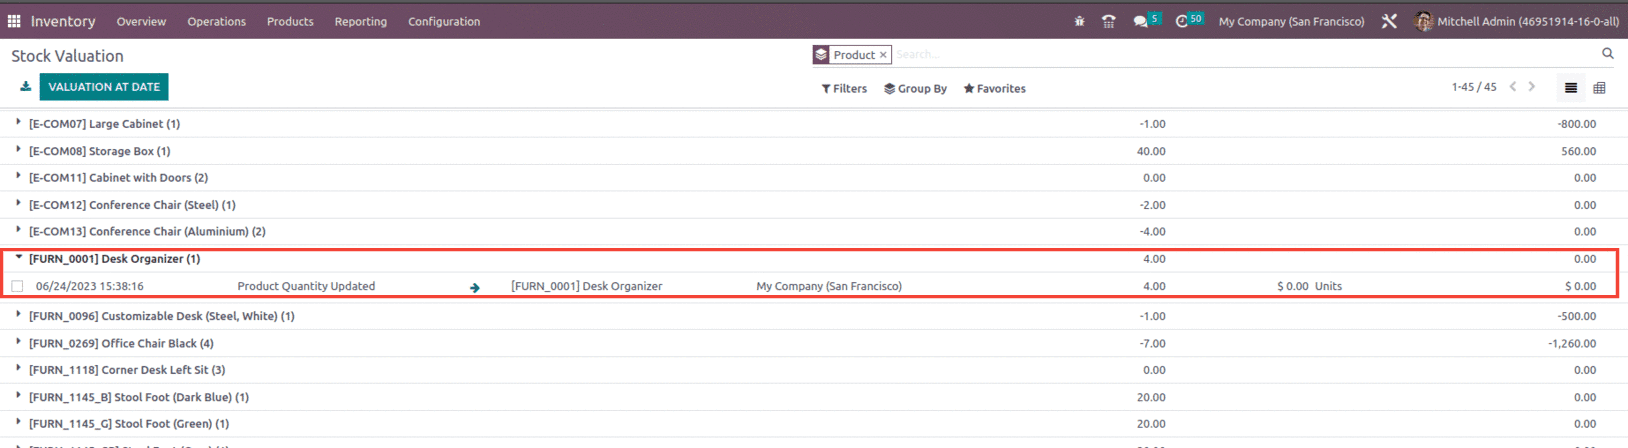 how-does-consignment-work-on-odoo-16-erp-8-cybrosys